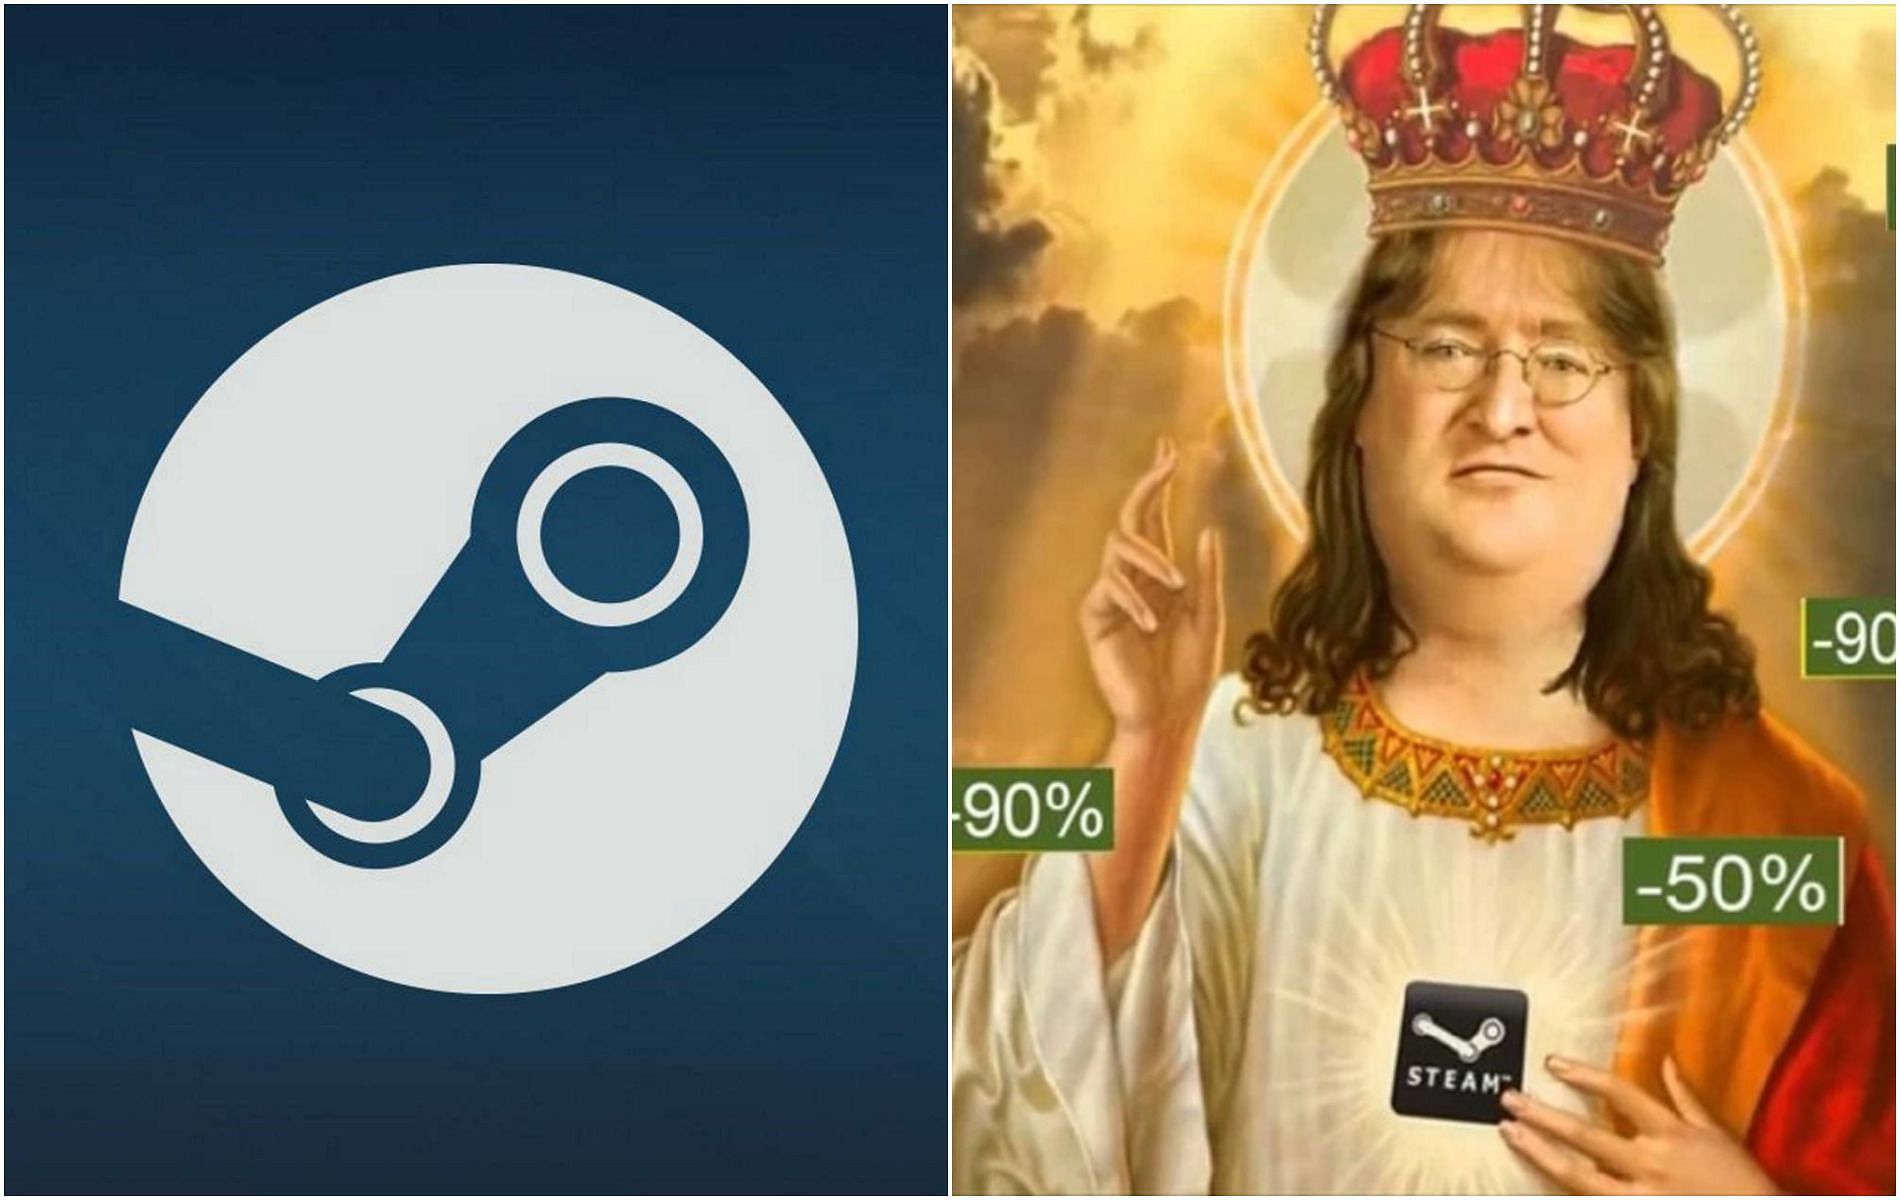 Lord Gaben is set to bless Steam gamers will plenty of amazing discounts to come (Images via Valve)